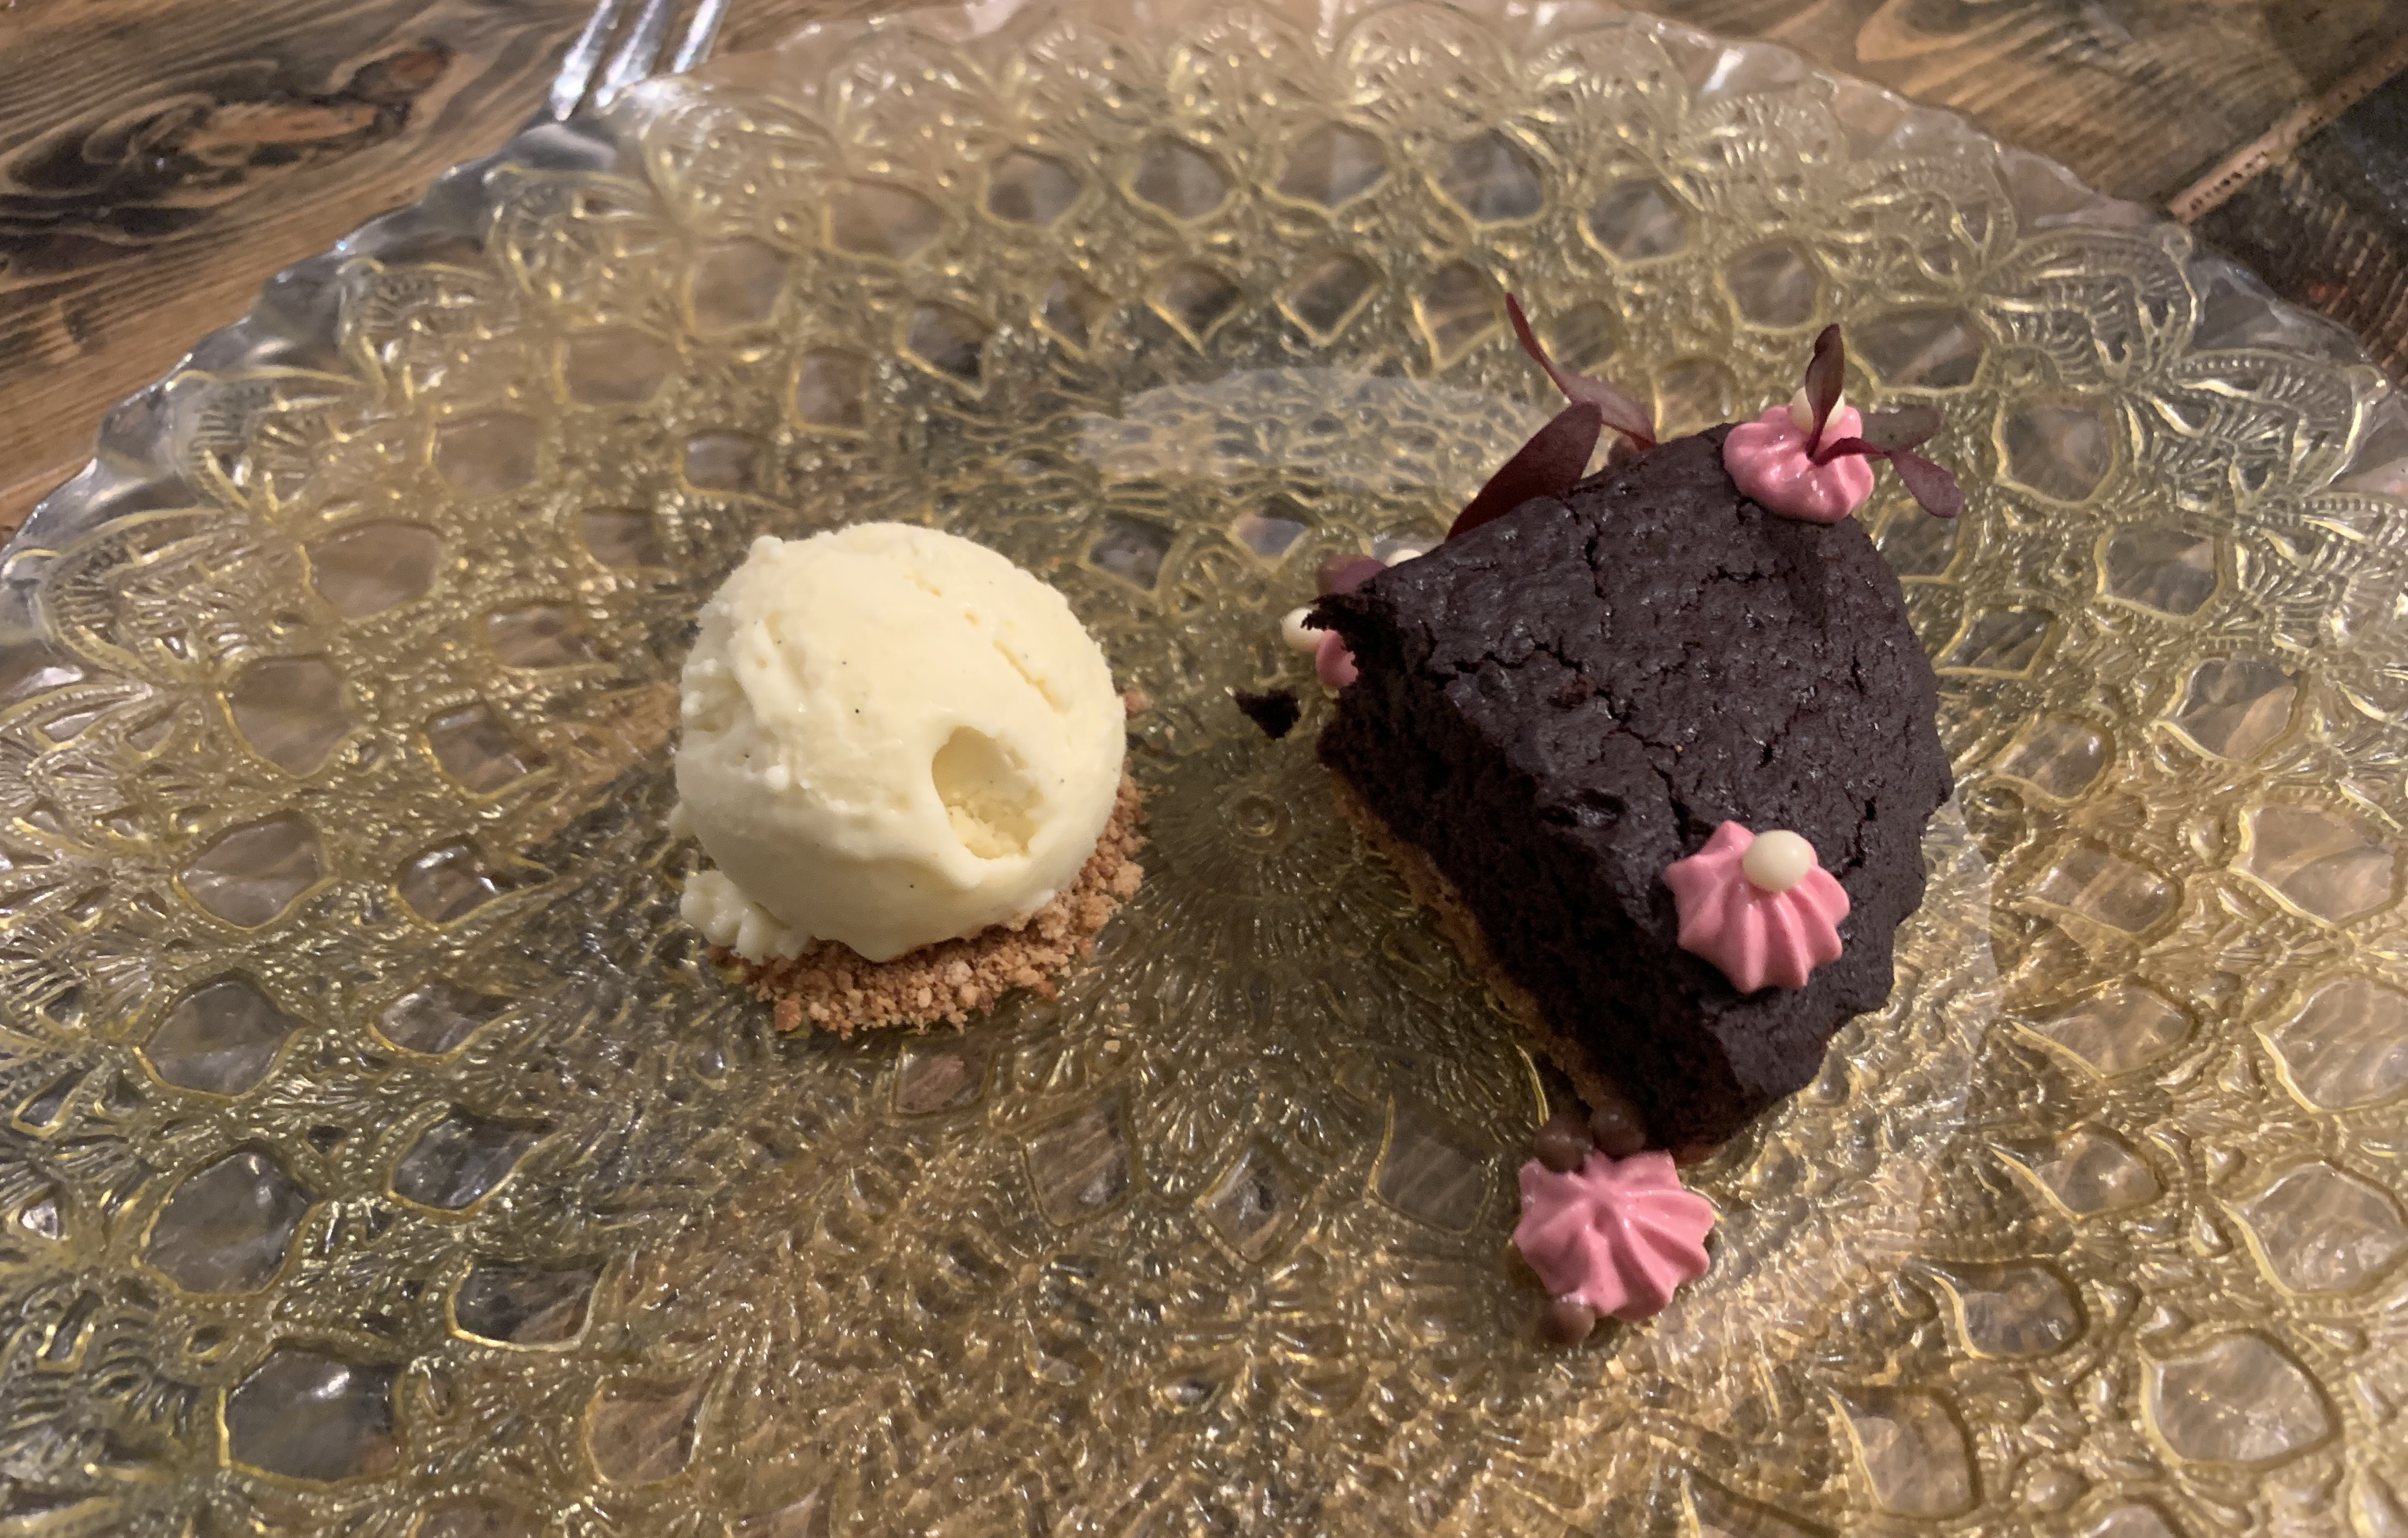 Large translucent plate with golden scrollwork. On the left is a scoop of perfectly white ice cream atop a bed of crushed graham cracker. On the right is a thick slice of brownie pie, dark black, and topped with a few dots of pink frosting made to look like flowers.